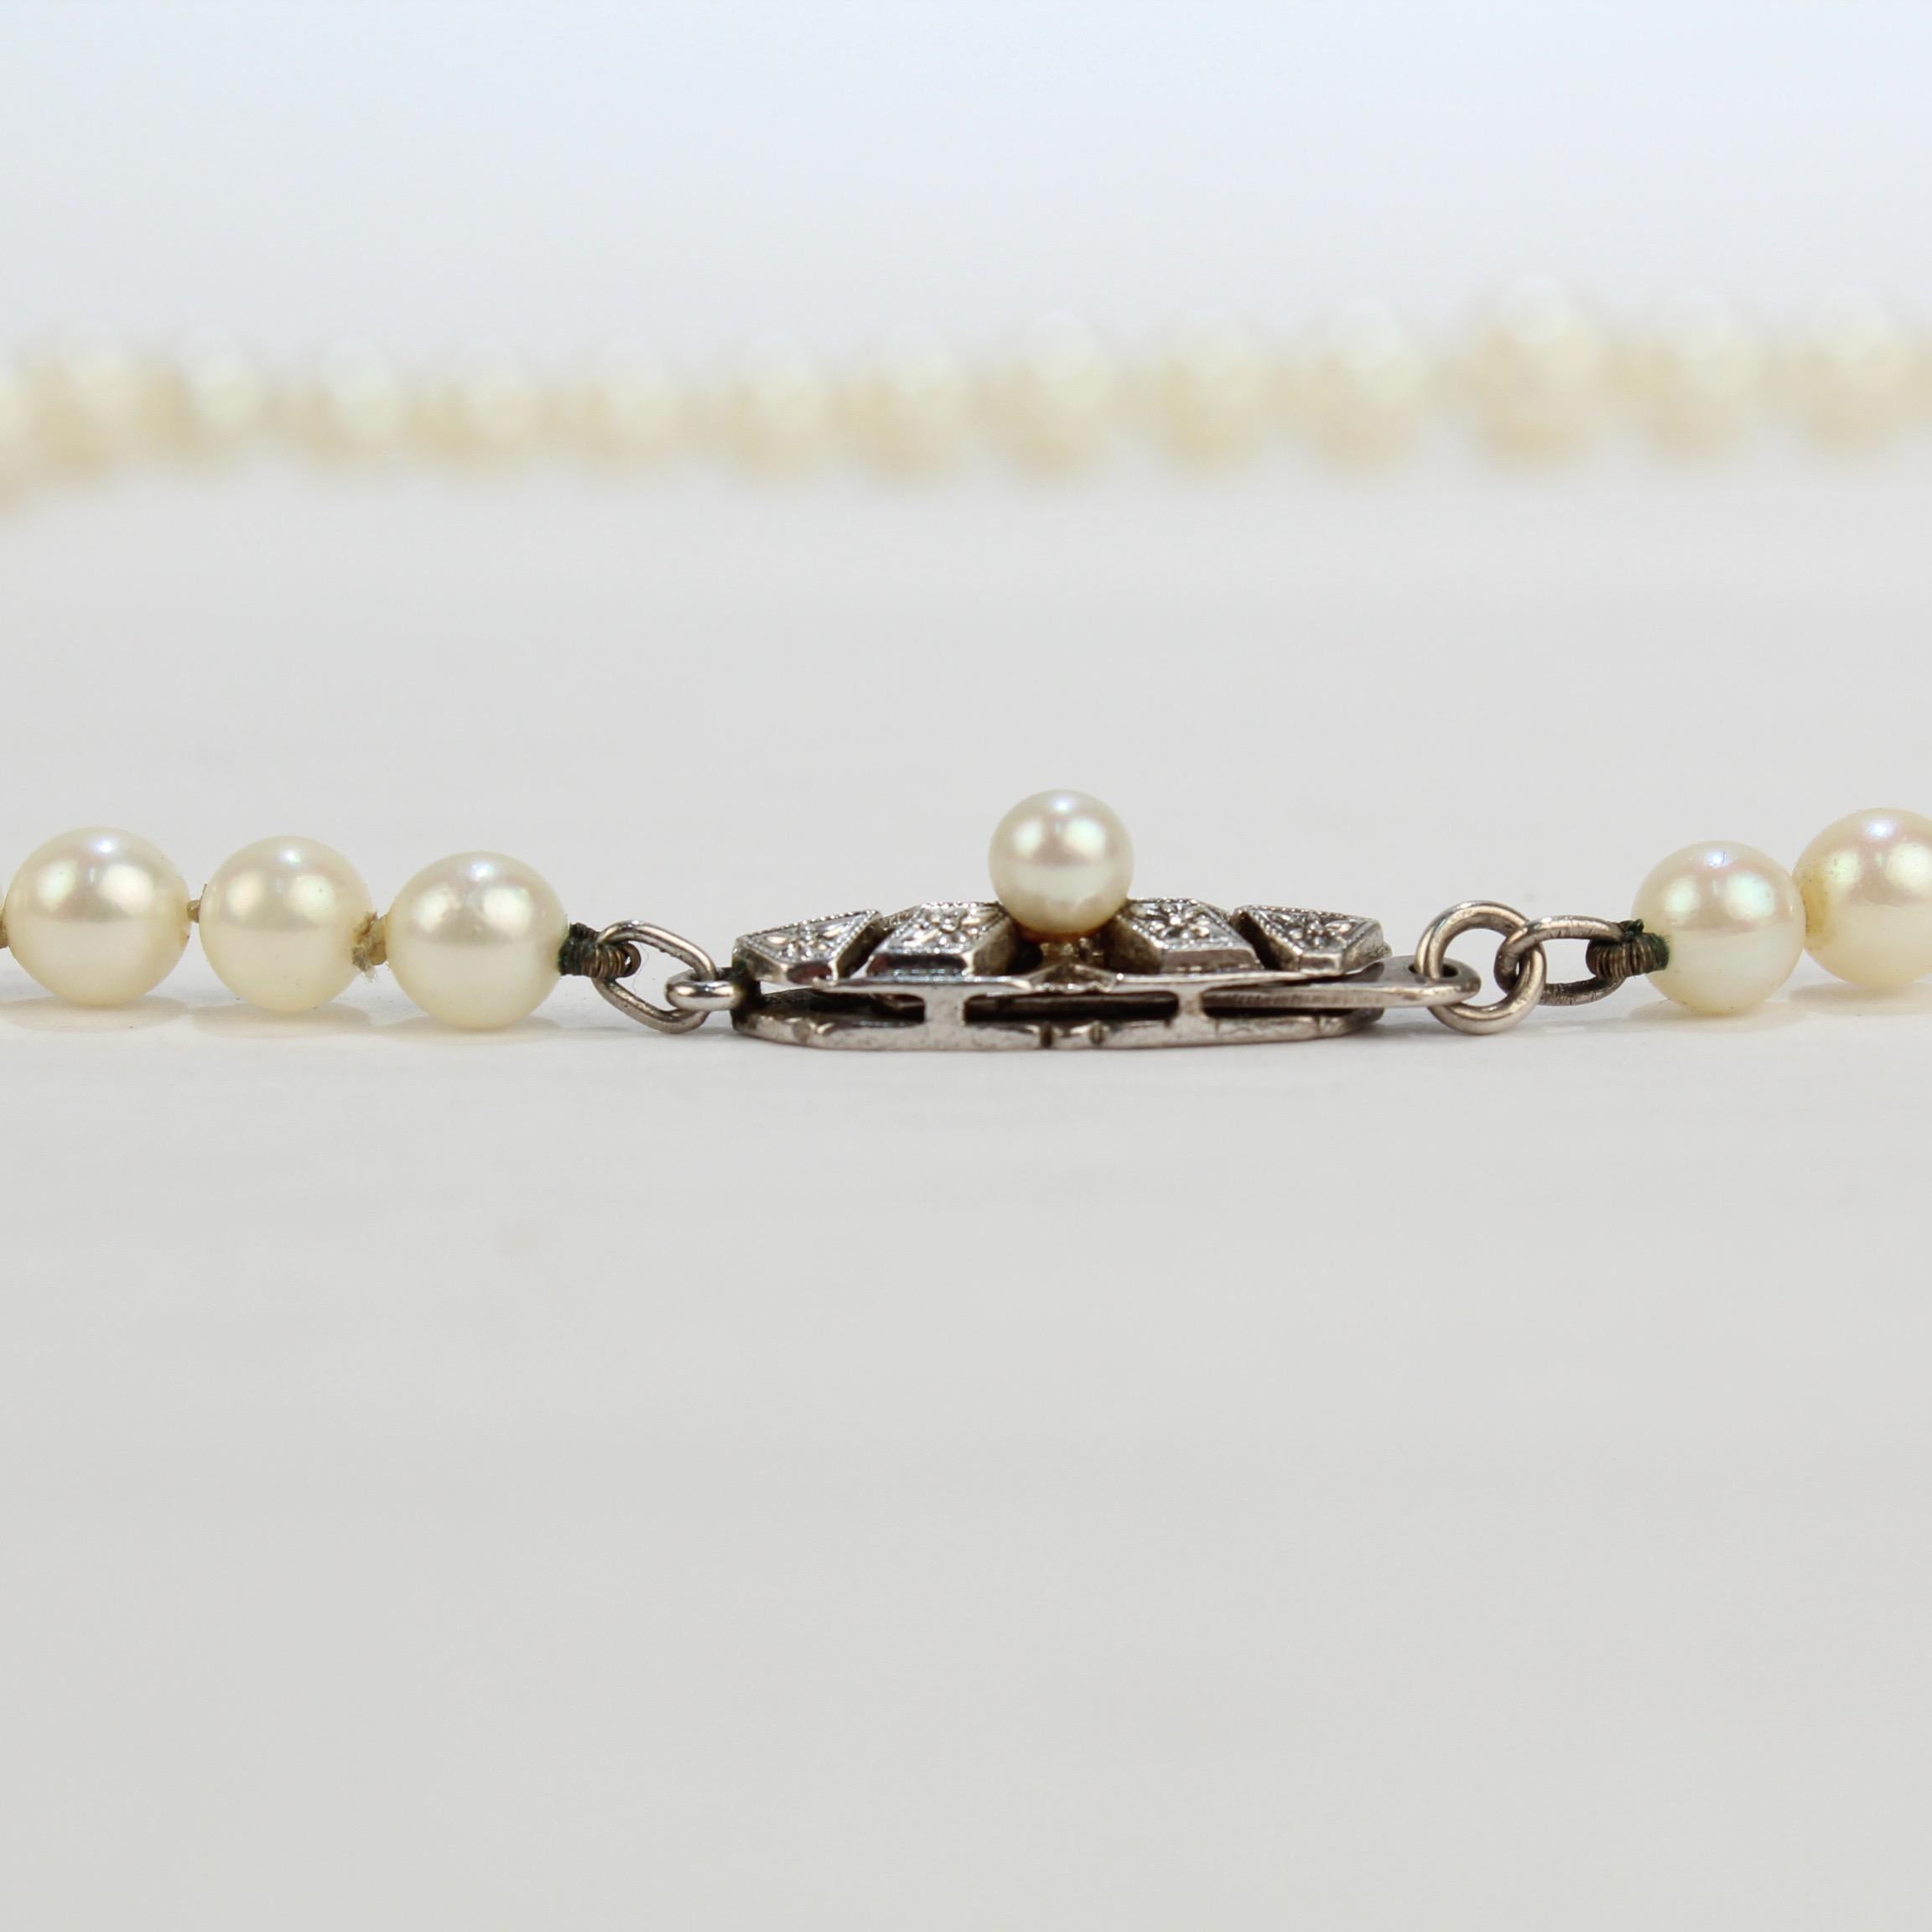 Edwardian Vintage Mikimoto Graduated Akoya Cultured Pearl Necklace with Silver Clasp